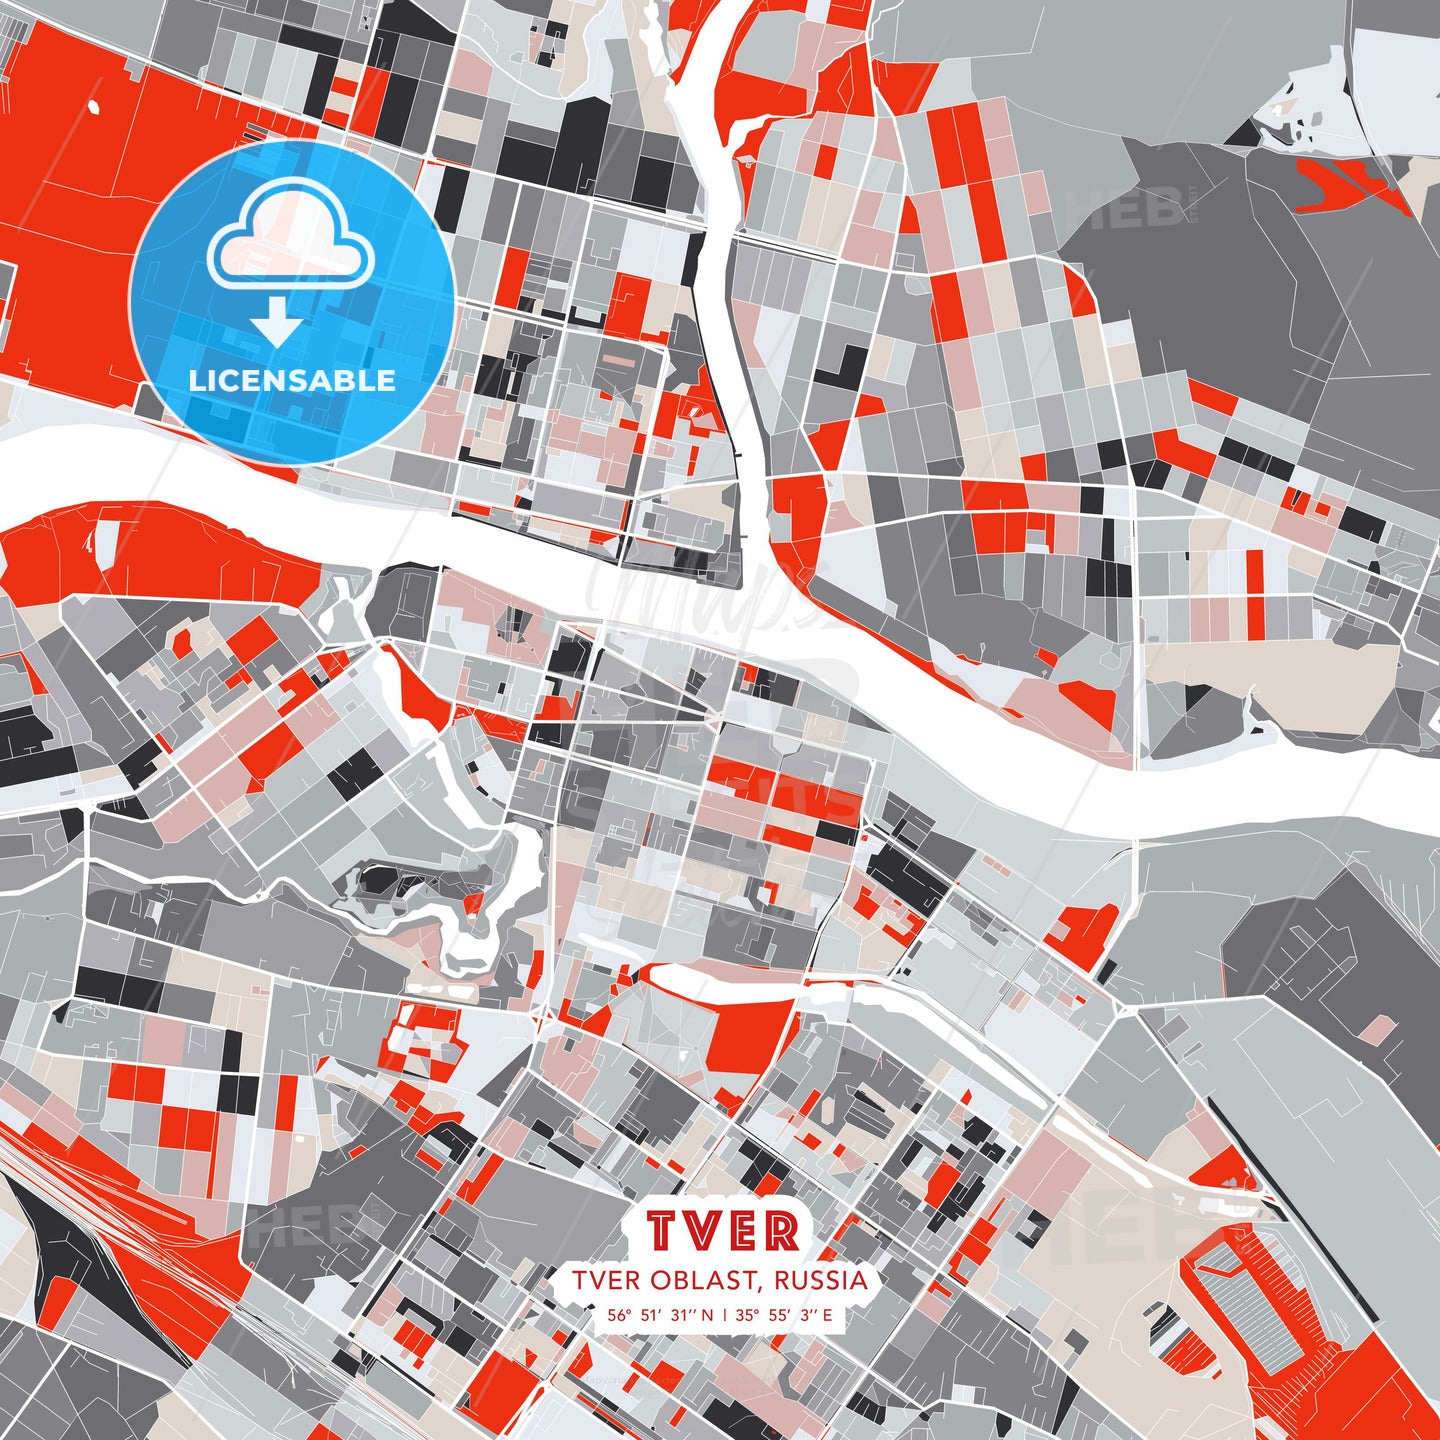 Tver, Tver Oblast, Russia, modern map - HEBSTREITS Sketches